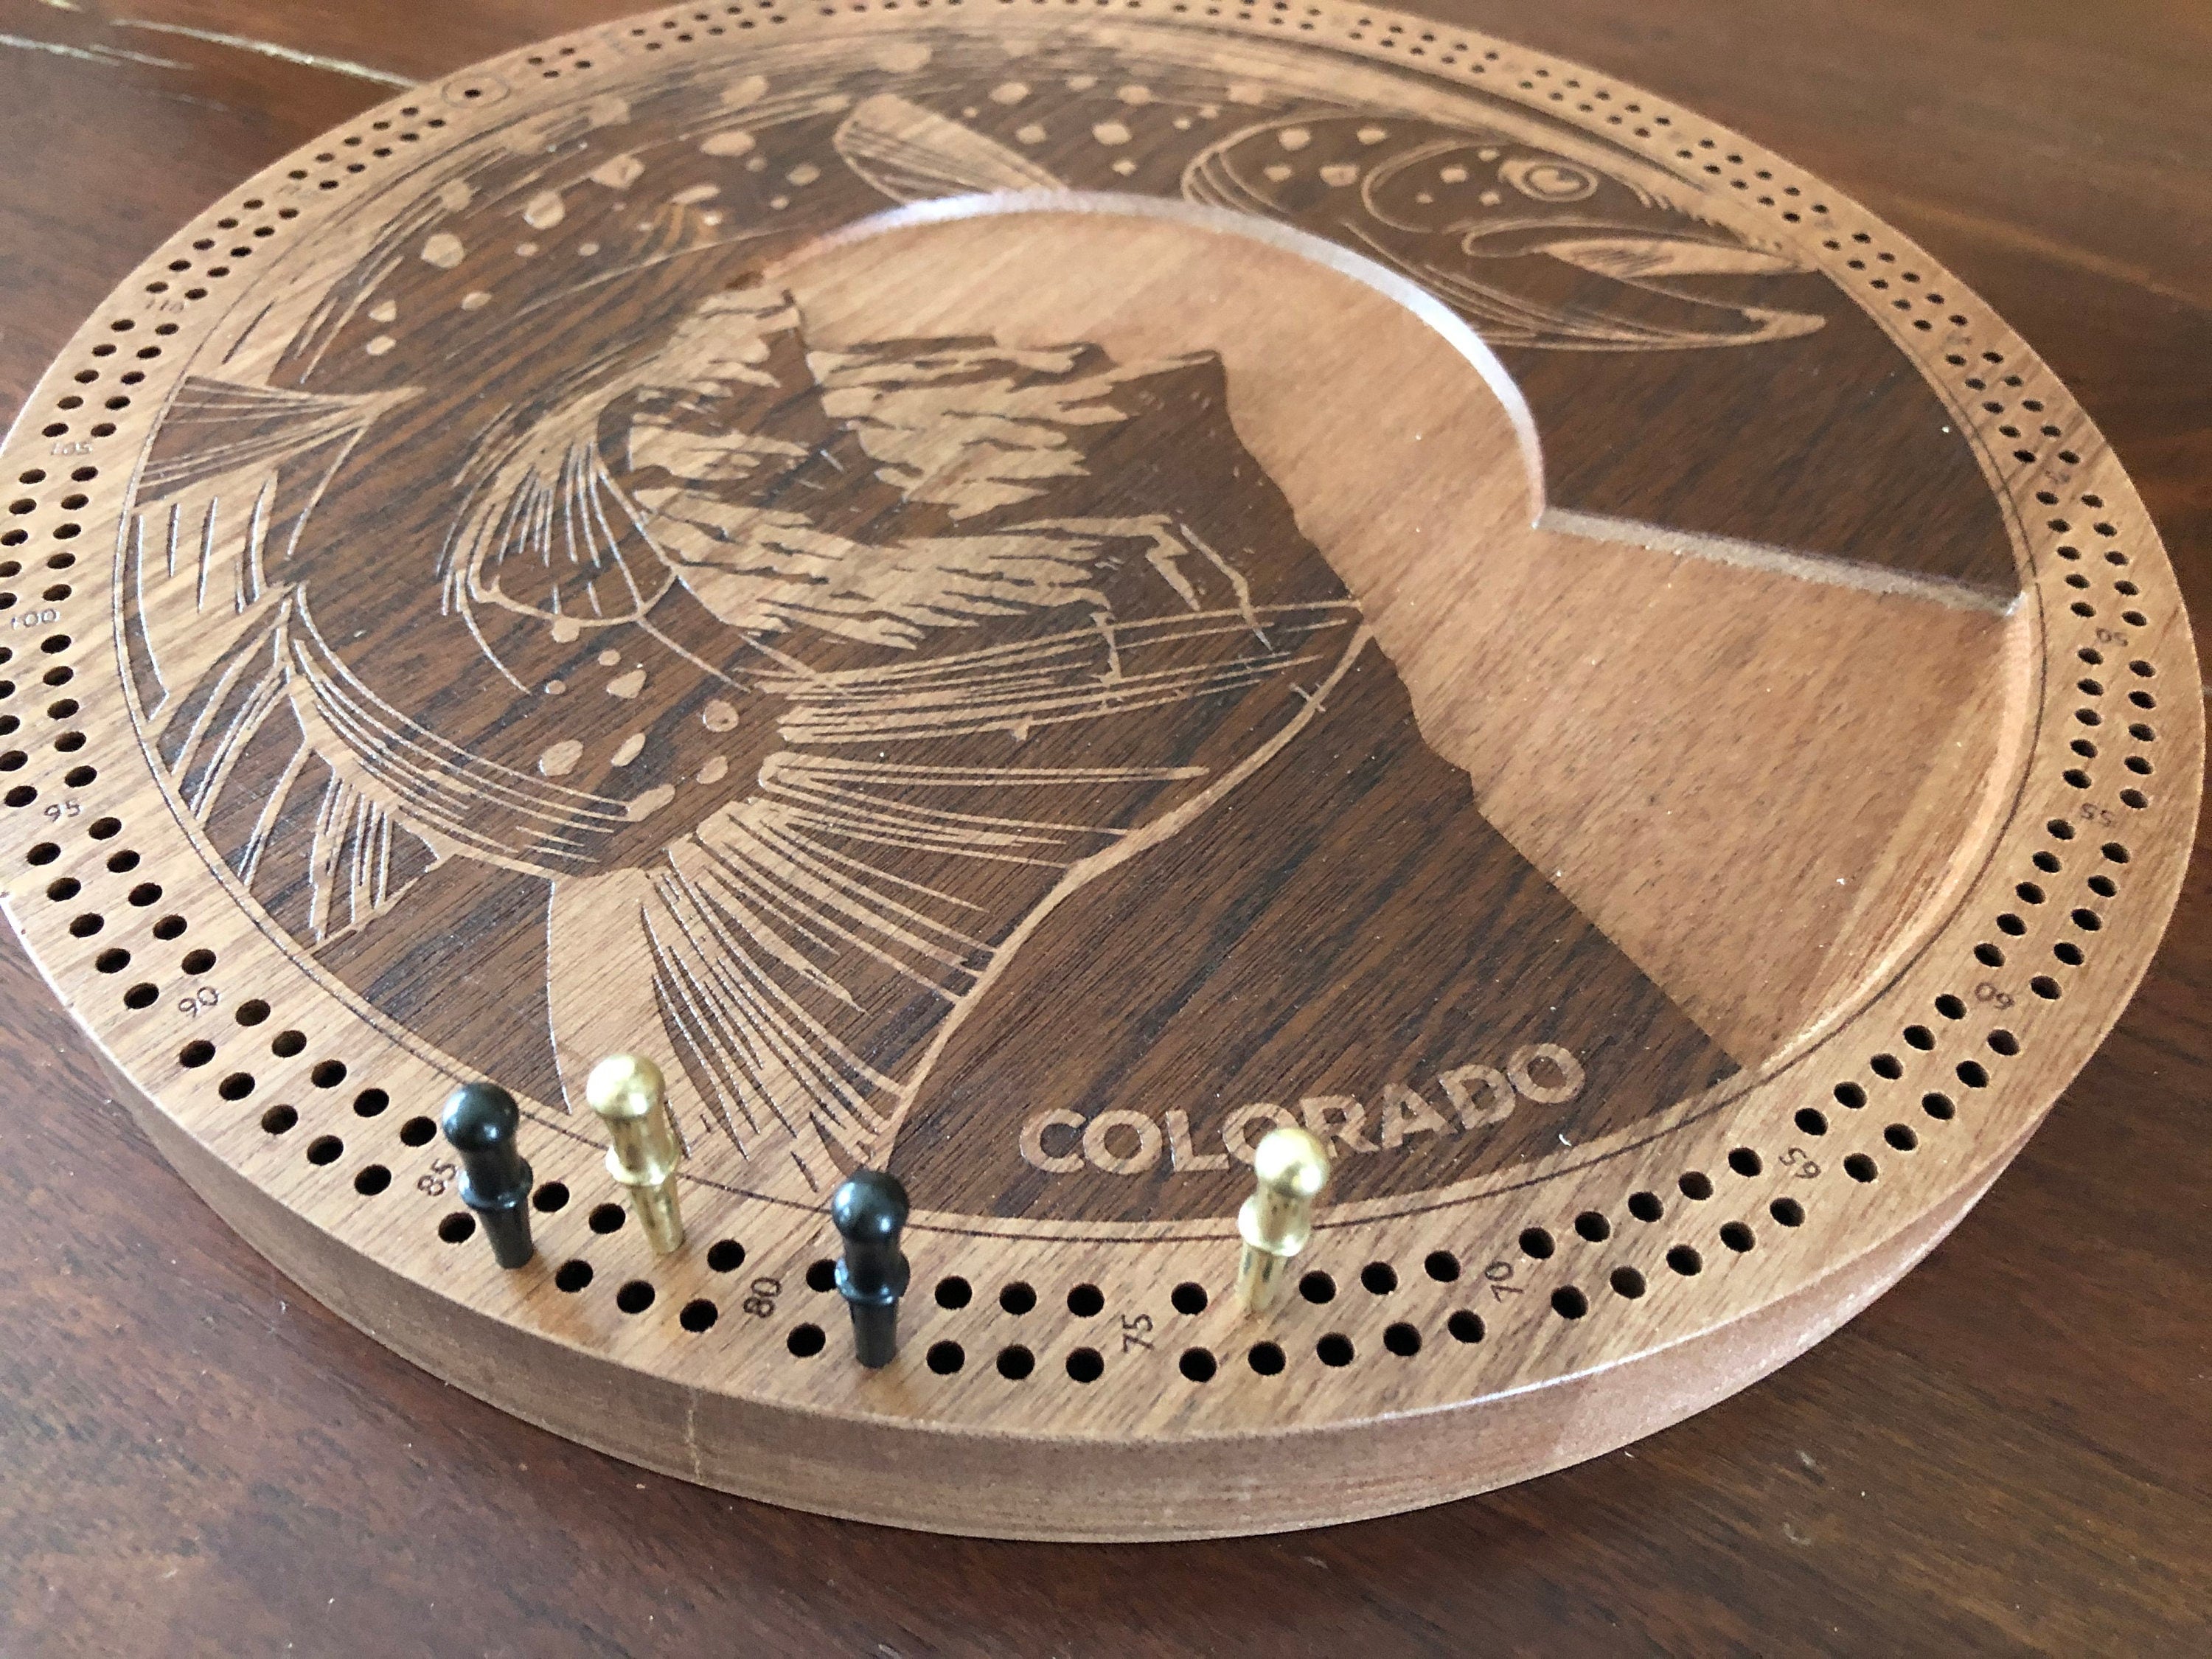 Colorado Trout and Mountain Cribbage Board & Wall Display